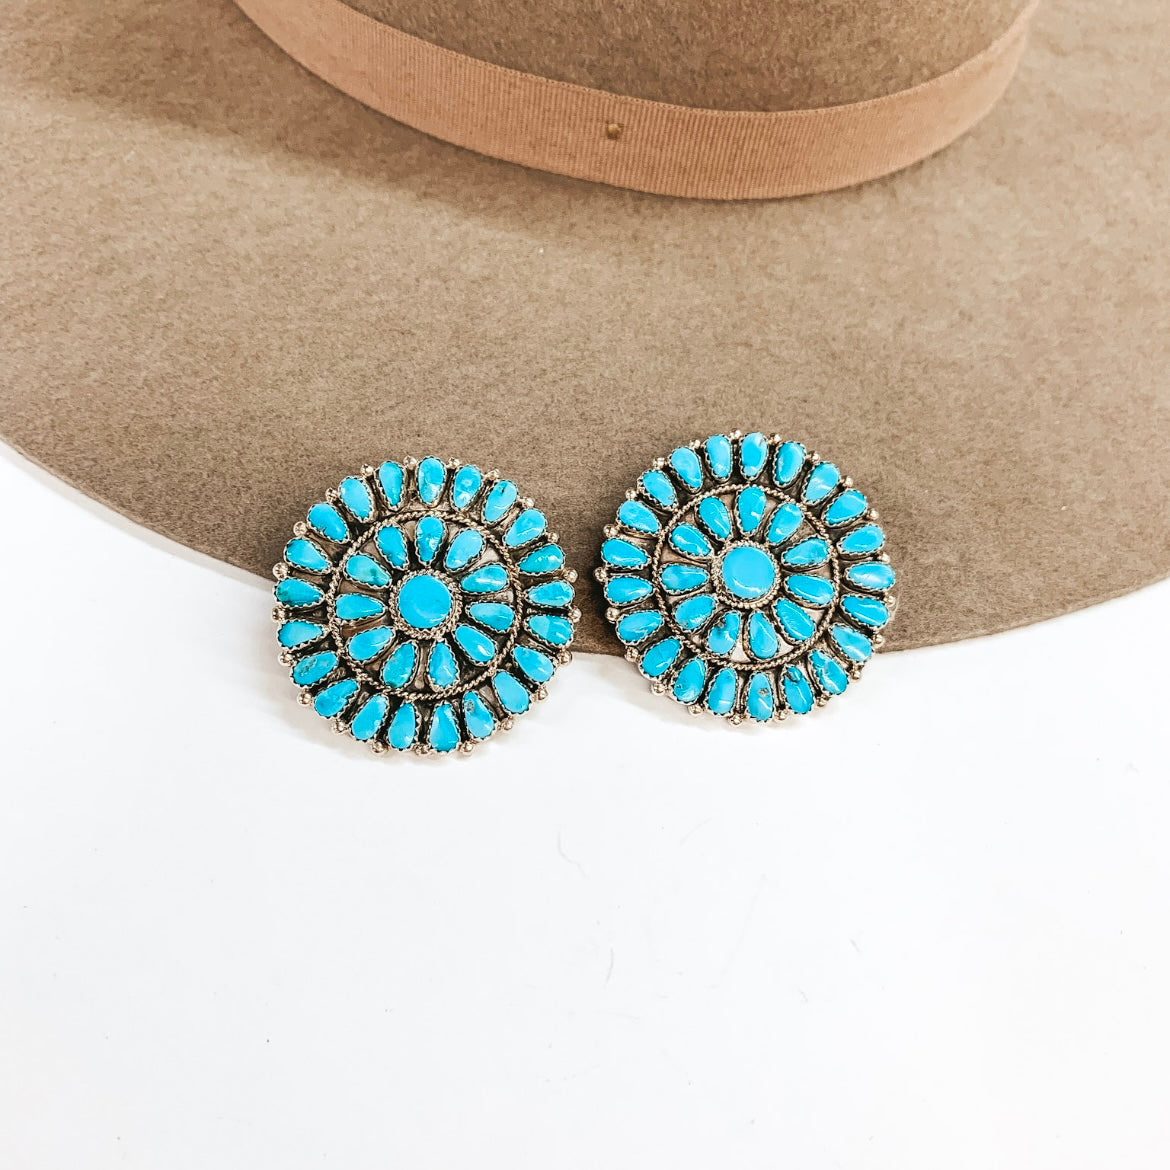 There is a pair of circle turquoise stone cluster earrings pictured with a hat on white background.